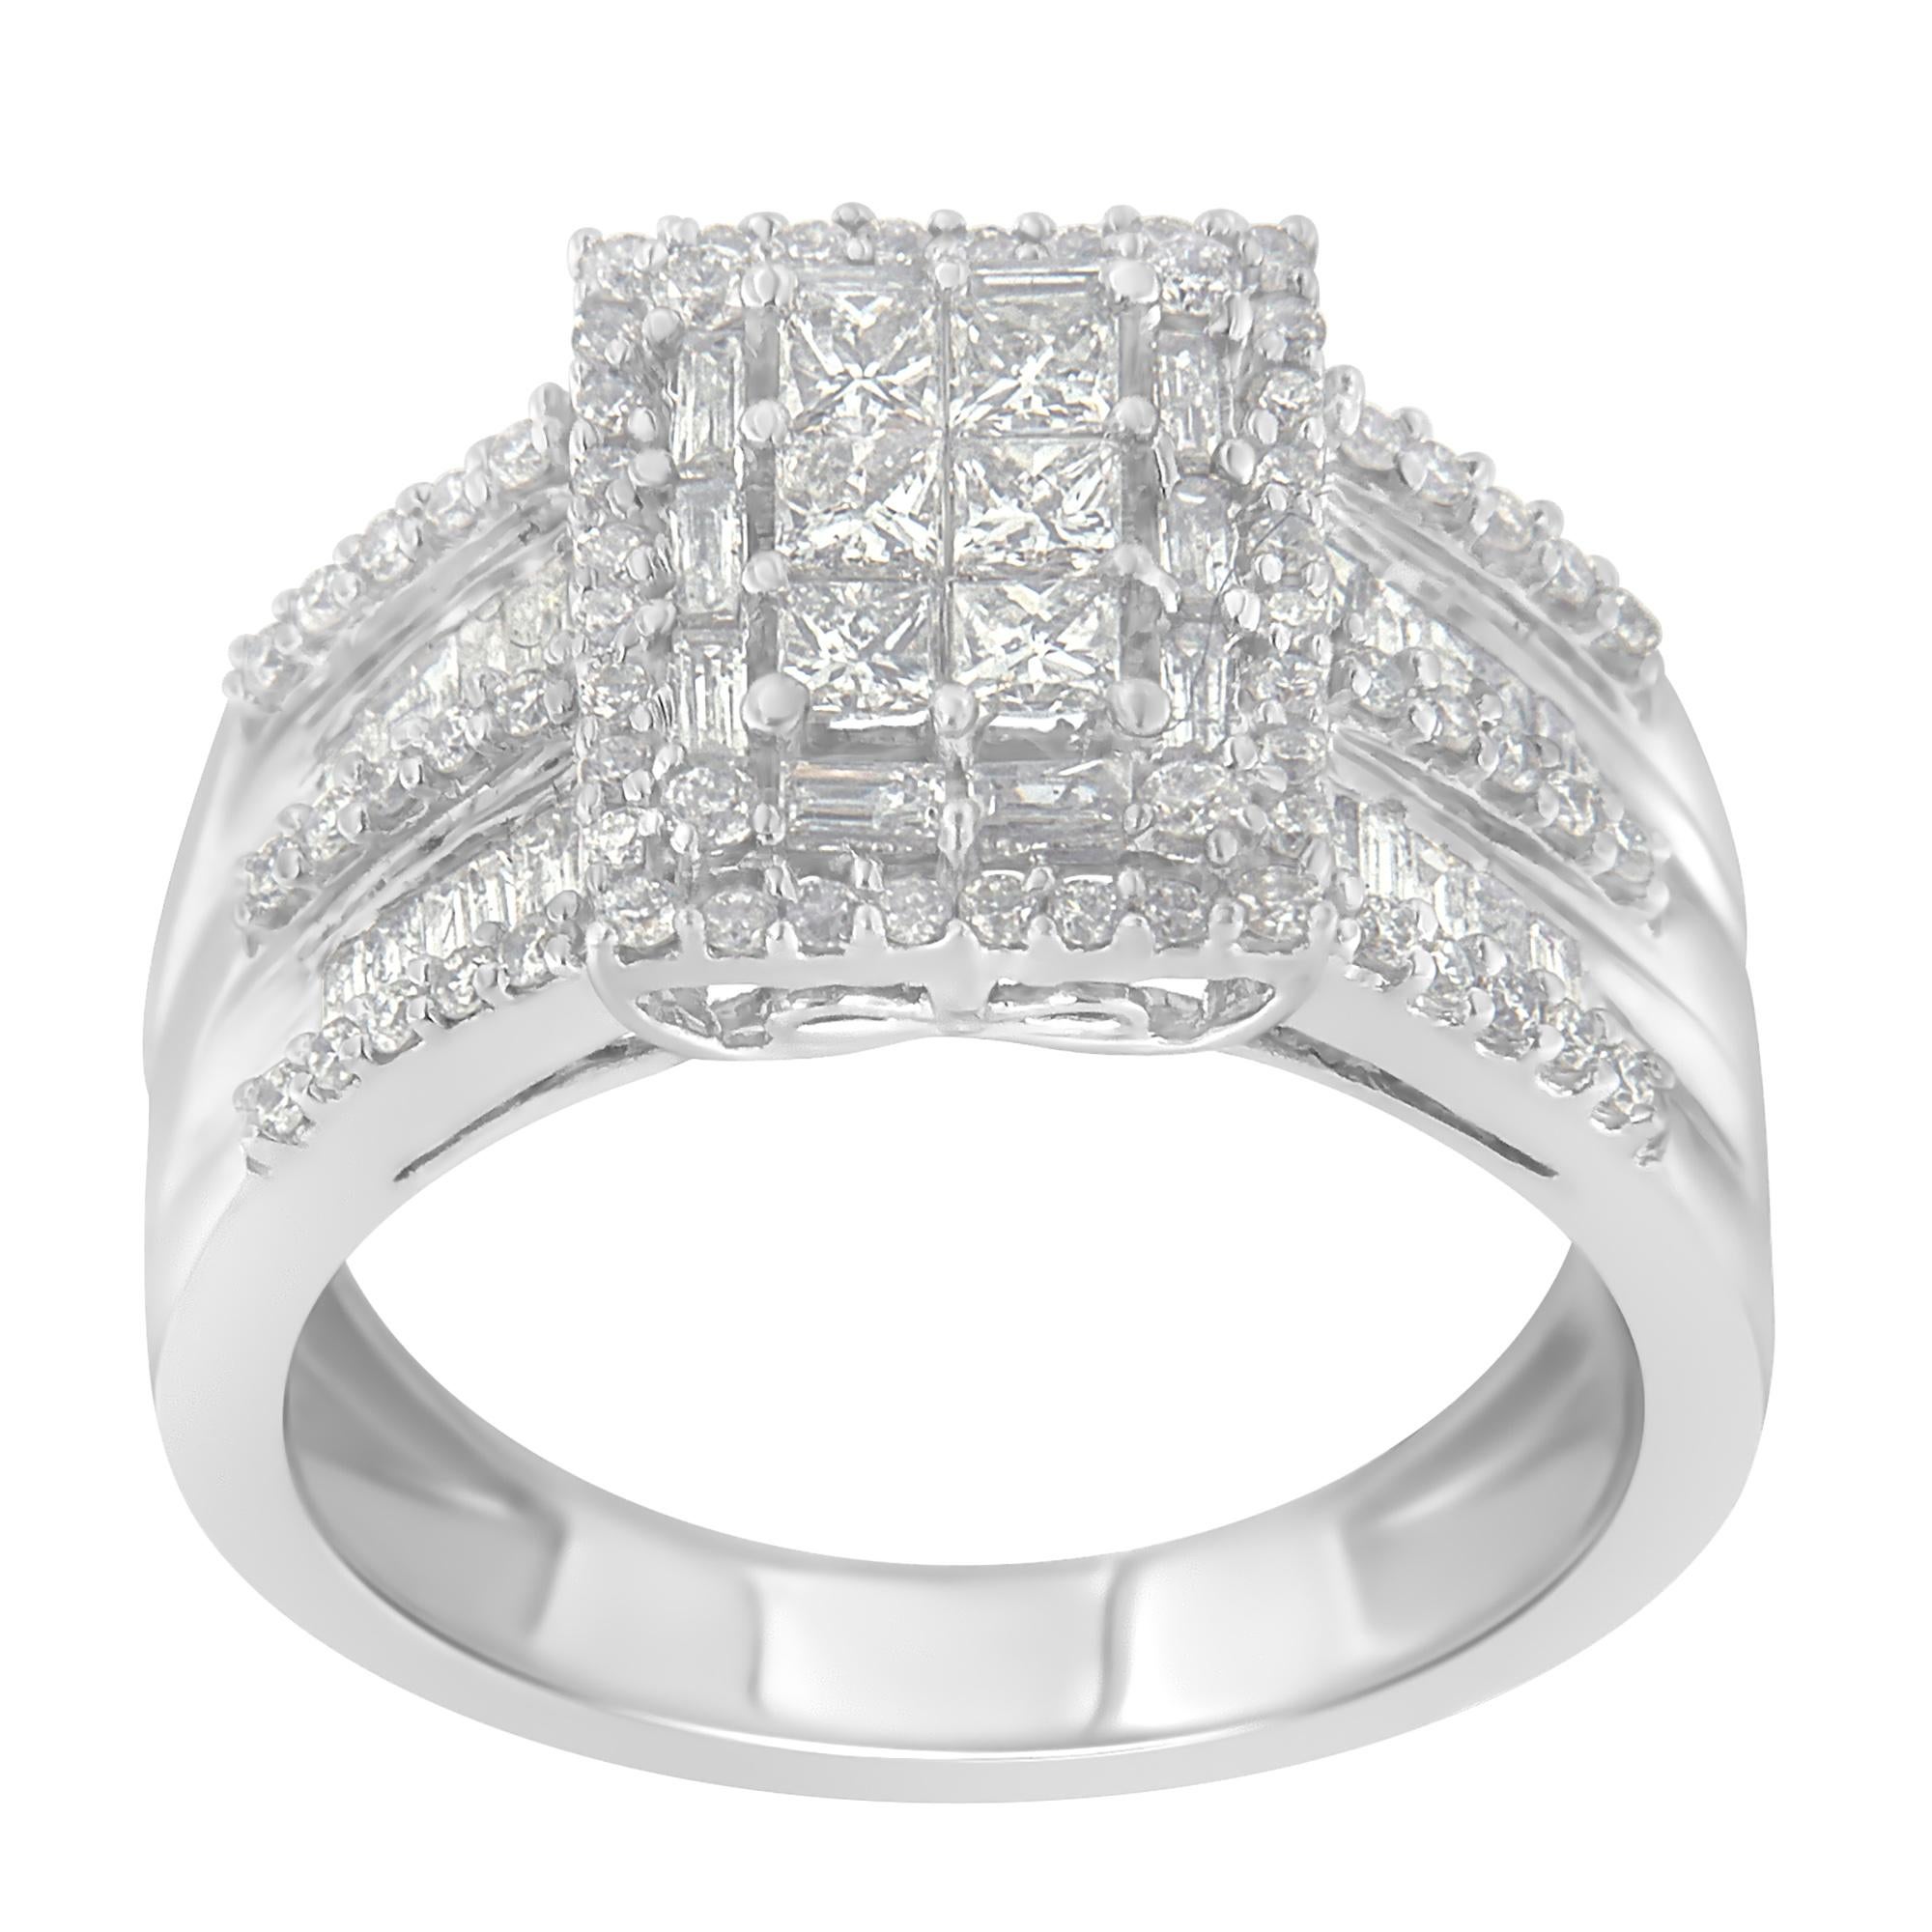 Contemporary 10K White Gold 1.0 Carat Diamond Cluster Ring For Sale